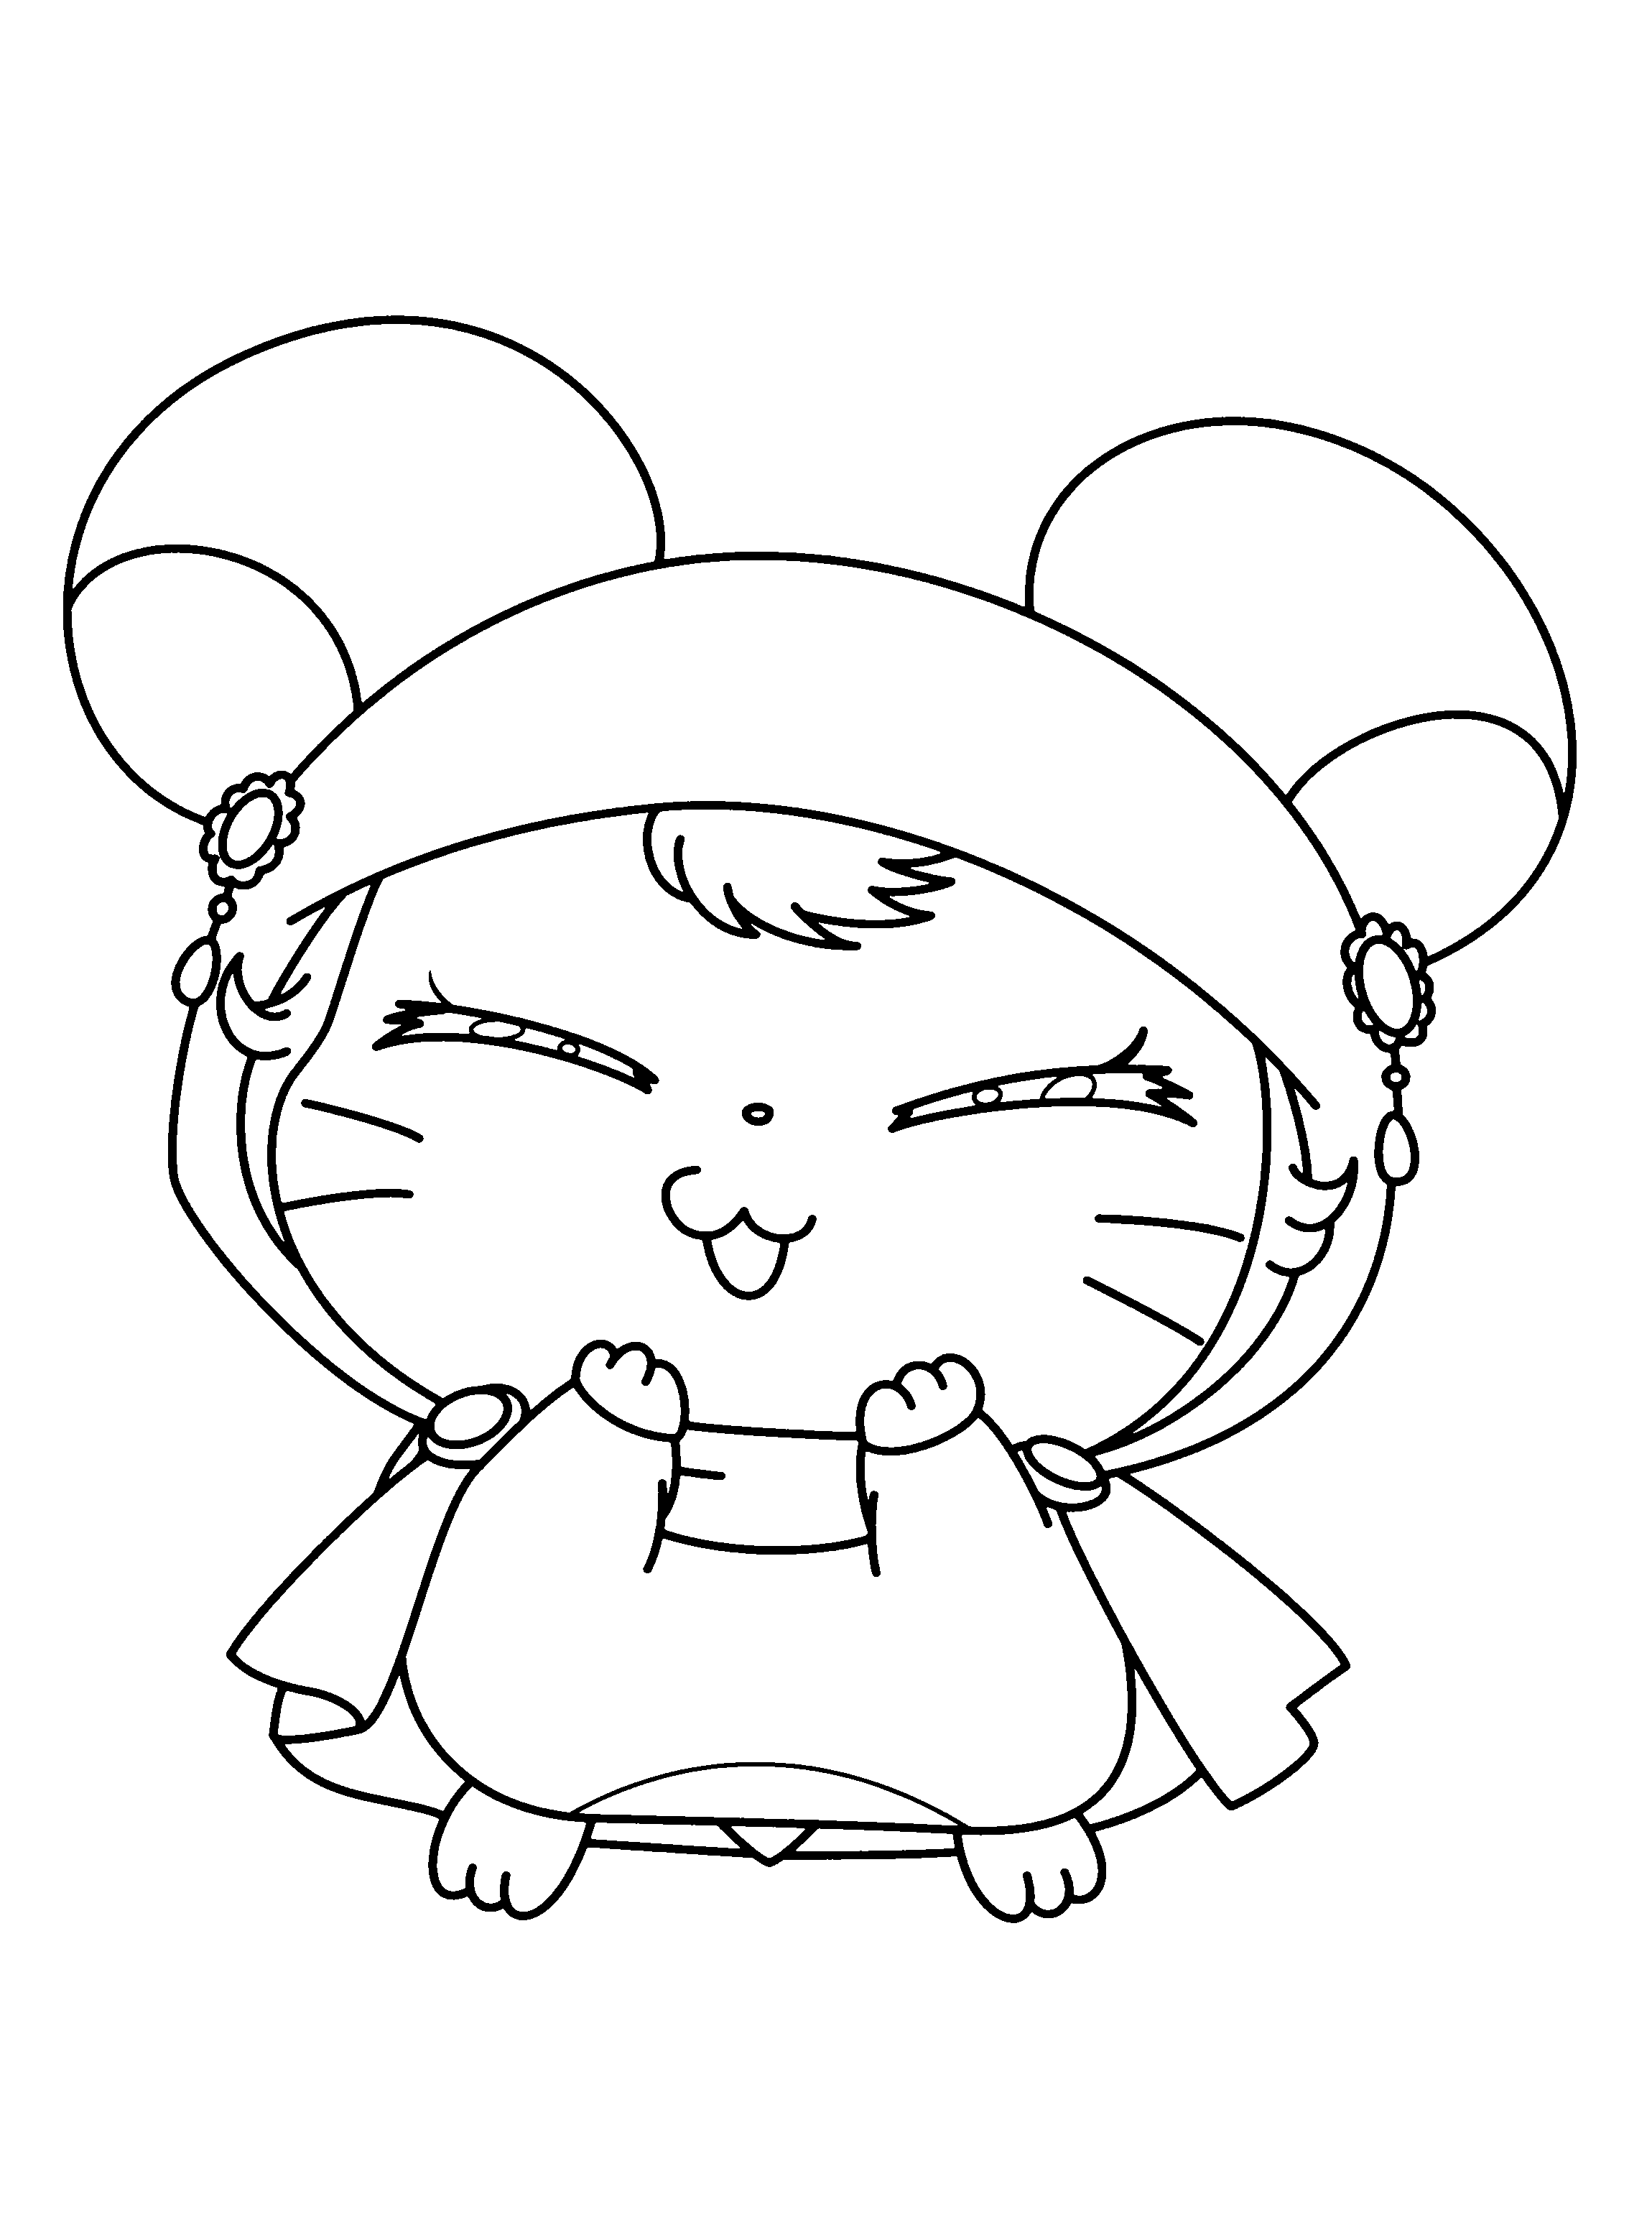 Coloring pages » Hamtaro Coloring pages